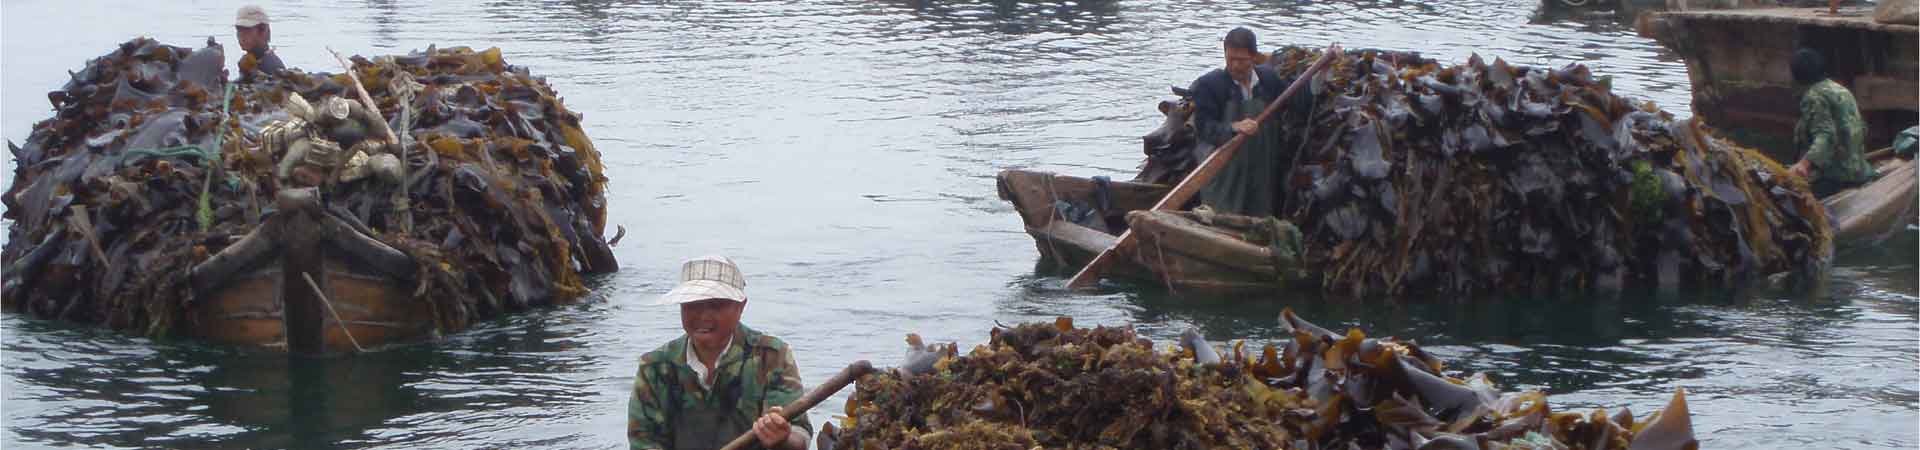 Seaweed collection from farms in China